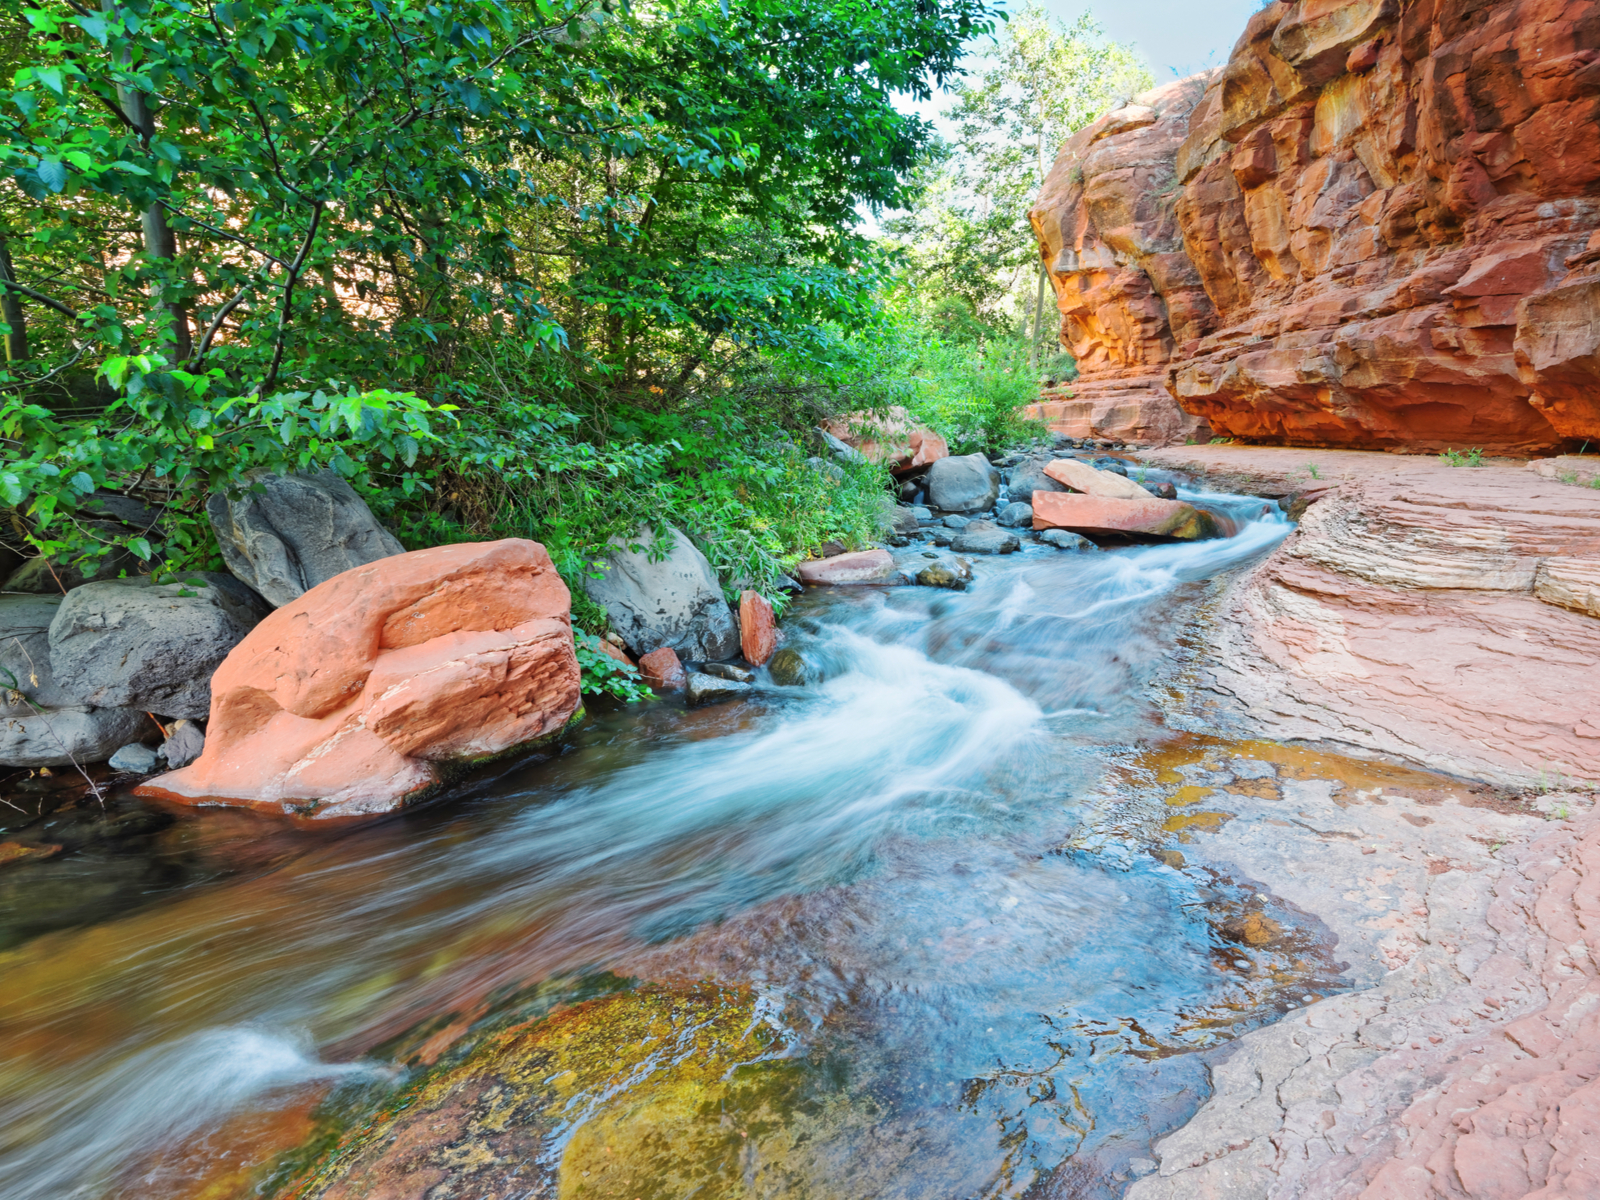 Rushing waters at Slide Rock State Park during the best time to visit Sedona